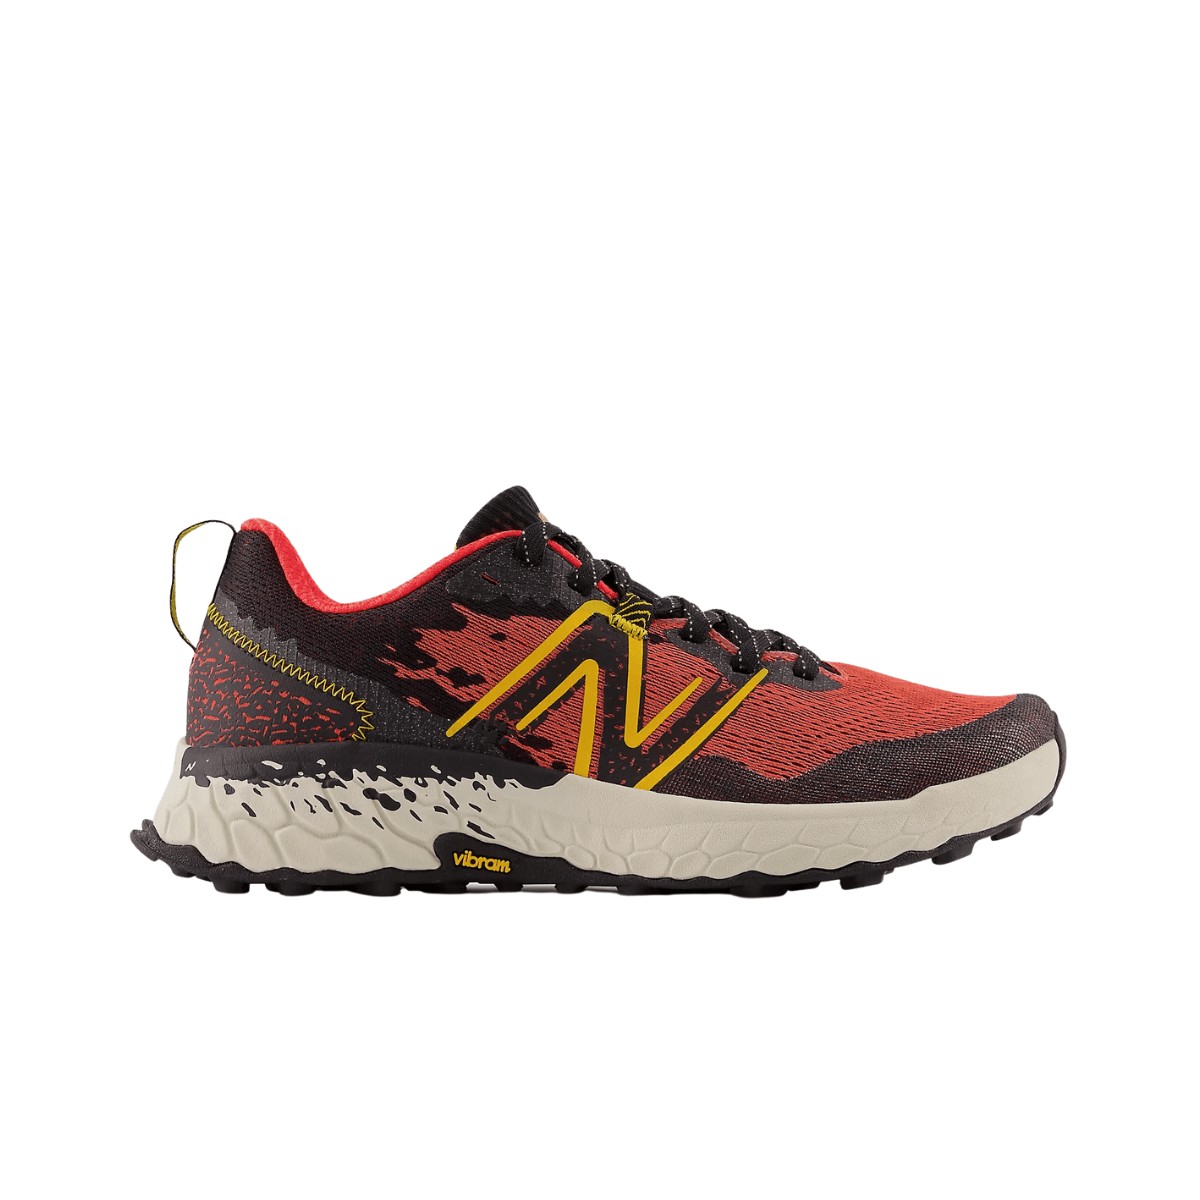 Chaussures New Balance Fresh Foam X Hierro V7 Rouge Jaune AW22, Taille 42 - EUR